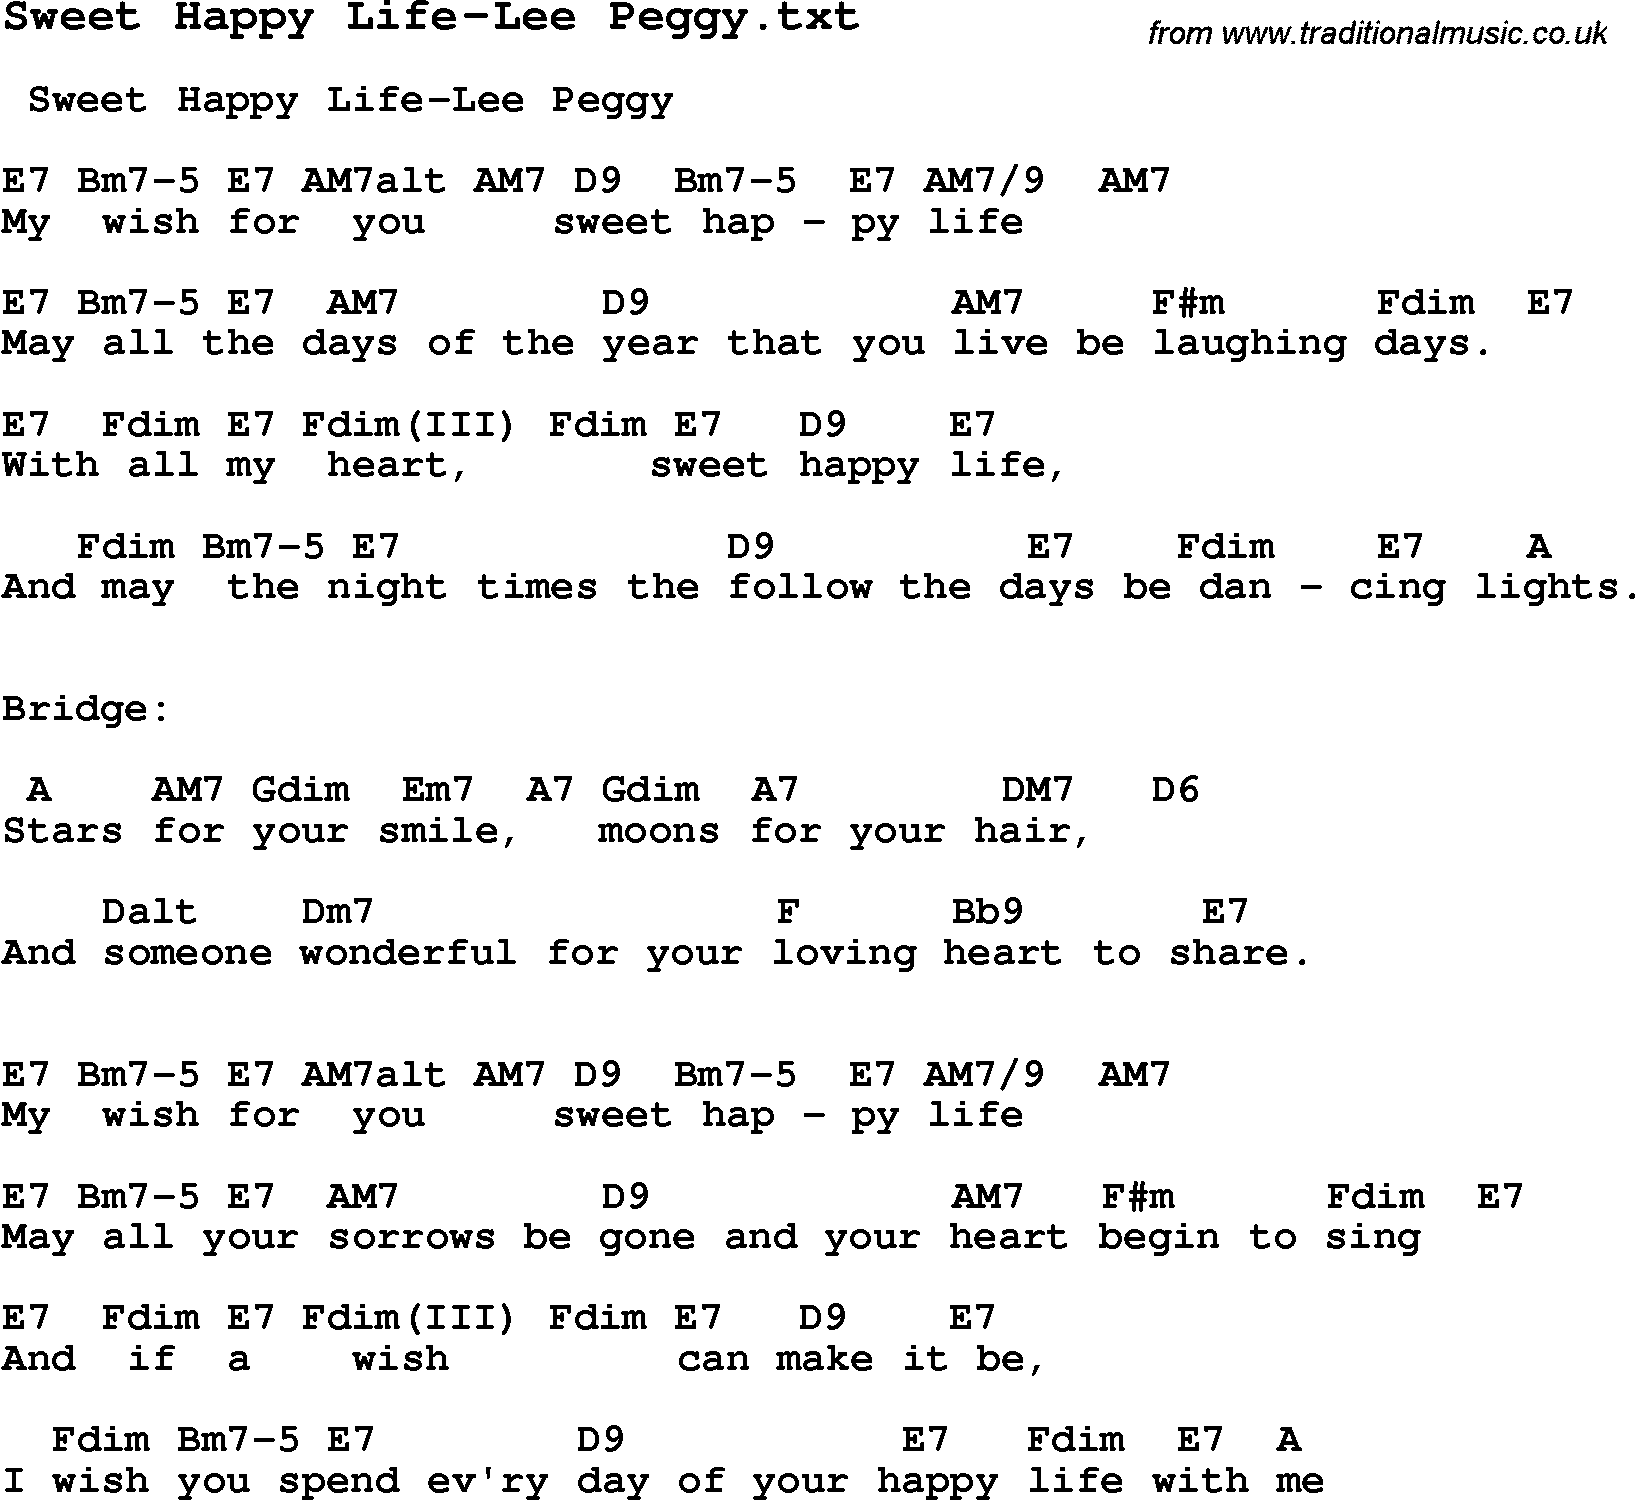 Jazz Song from top bands and vocal artists with chords, tabs and lyrics - Sweet Happy Life-Lee Peggy